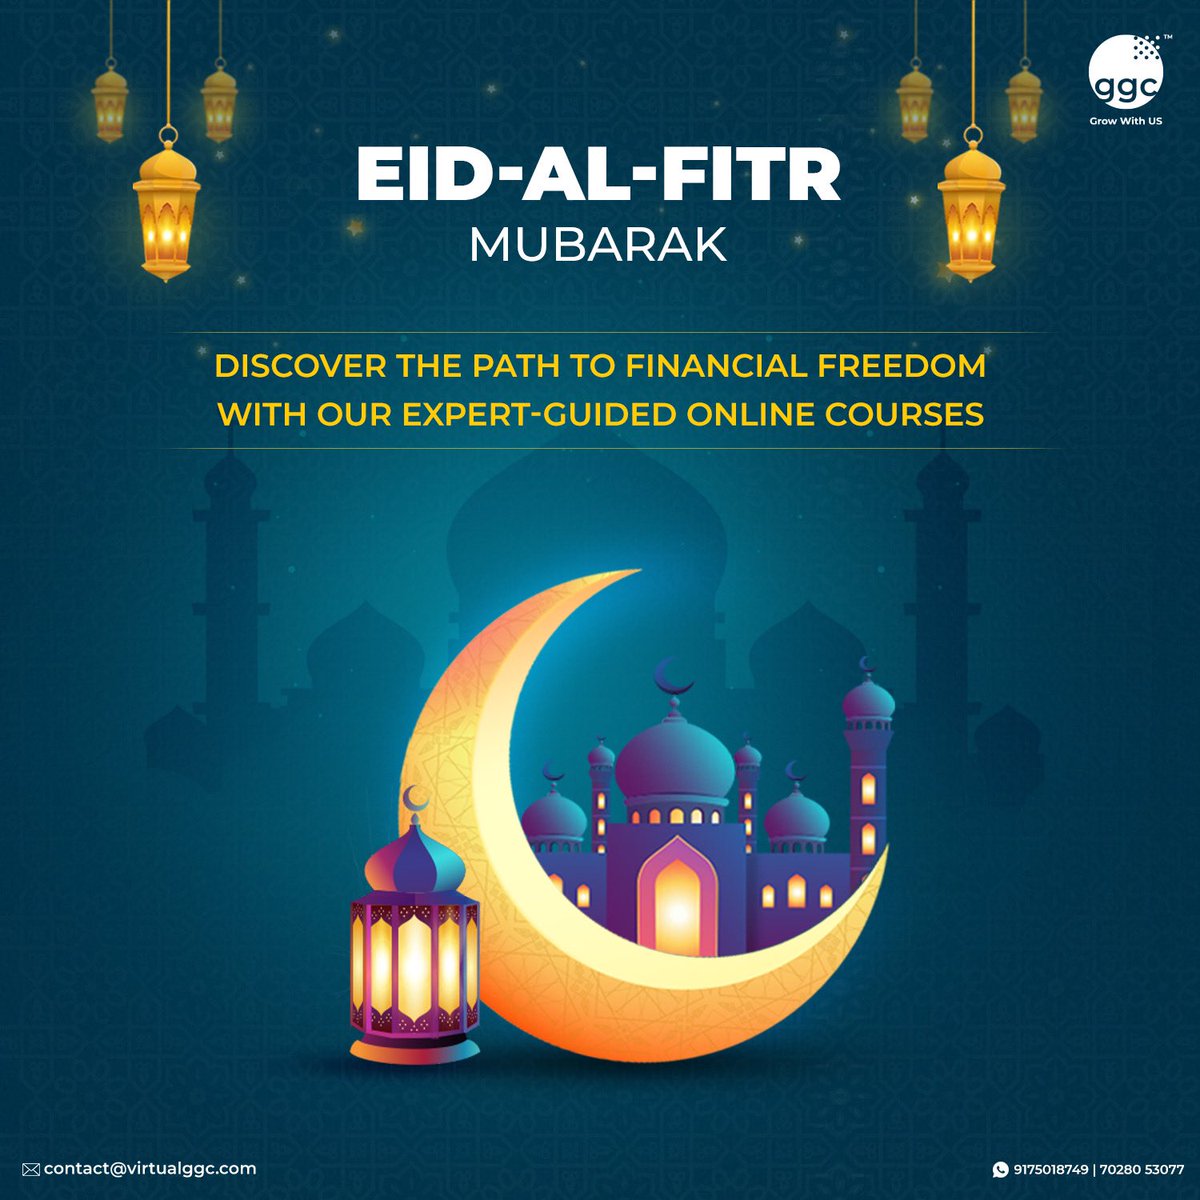 Let GGC PTA's online finance courses be your guiding light towards your financial empowerment, this Eid-al-Fitr 🌙, For more info, visit ggcpta.com.
#virtualggc #EidAlFitr #FinancialEmpowerment 
#GGCPTA #FinanceEducation #InvestInYourself #LearnFinance